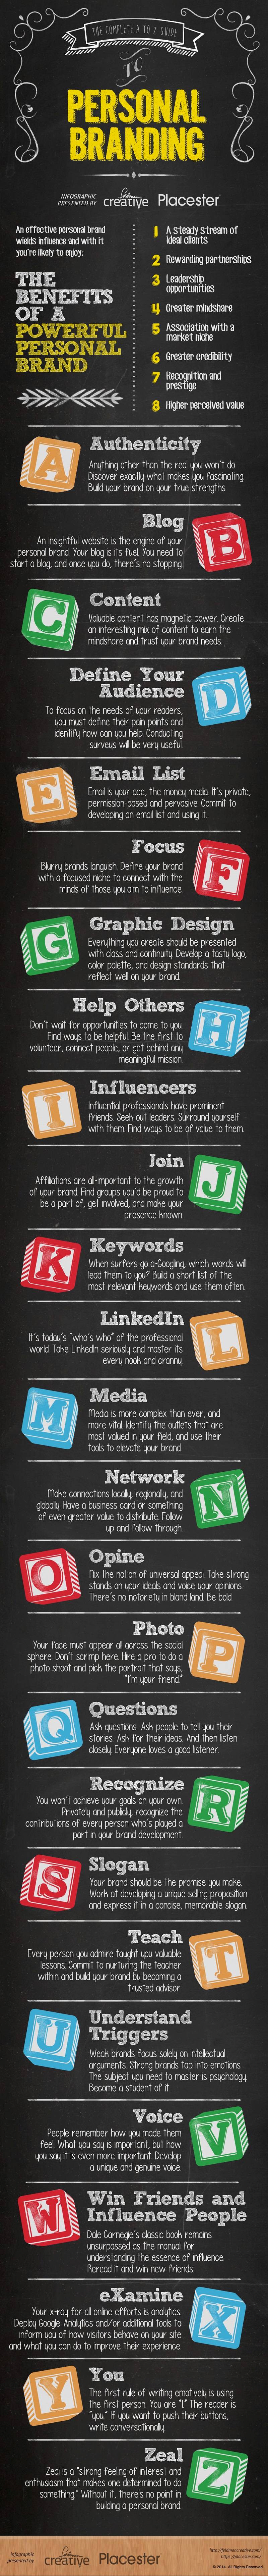 A to Z Guide to Personal Branding